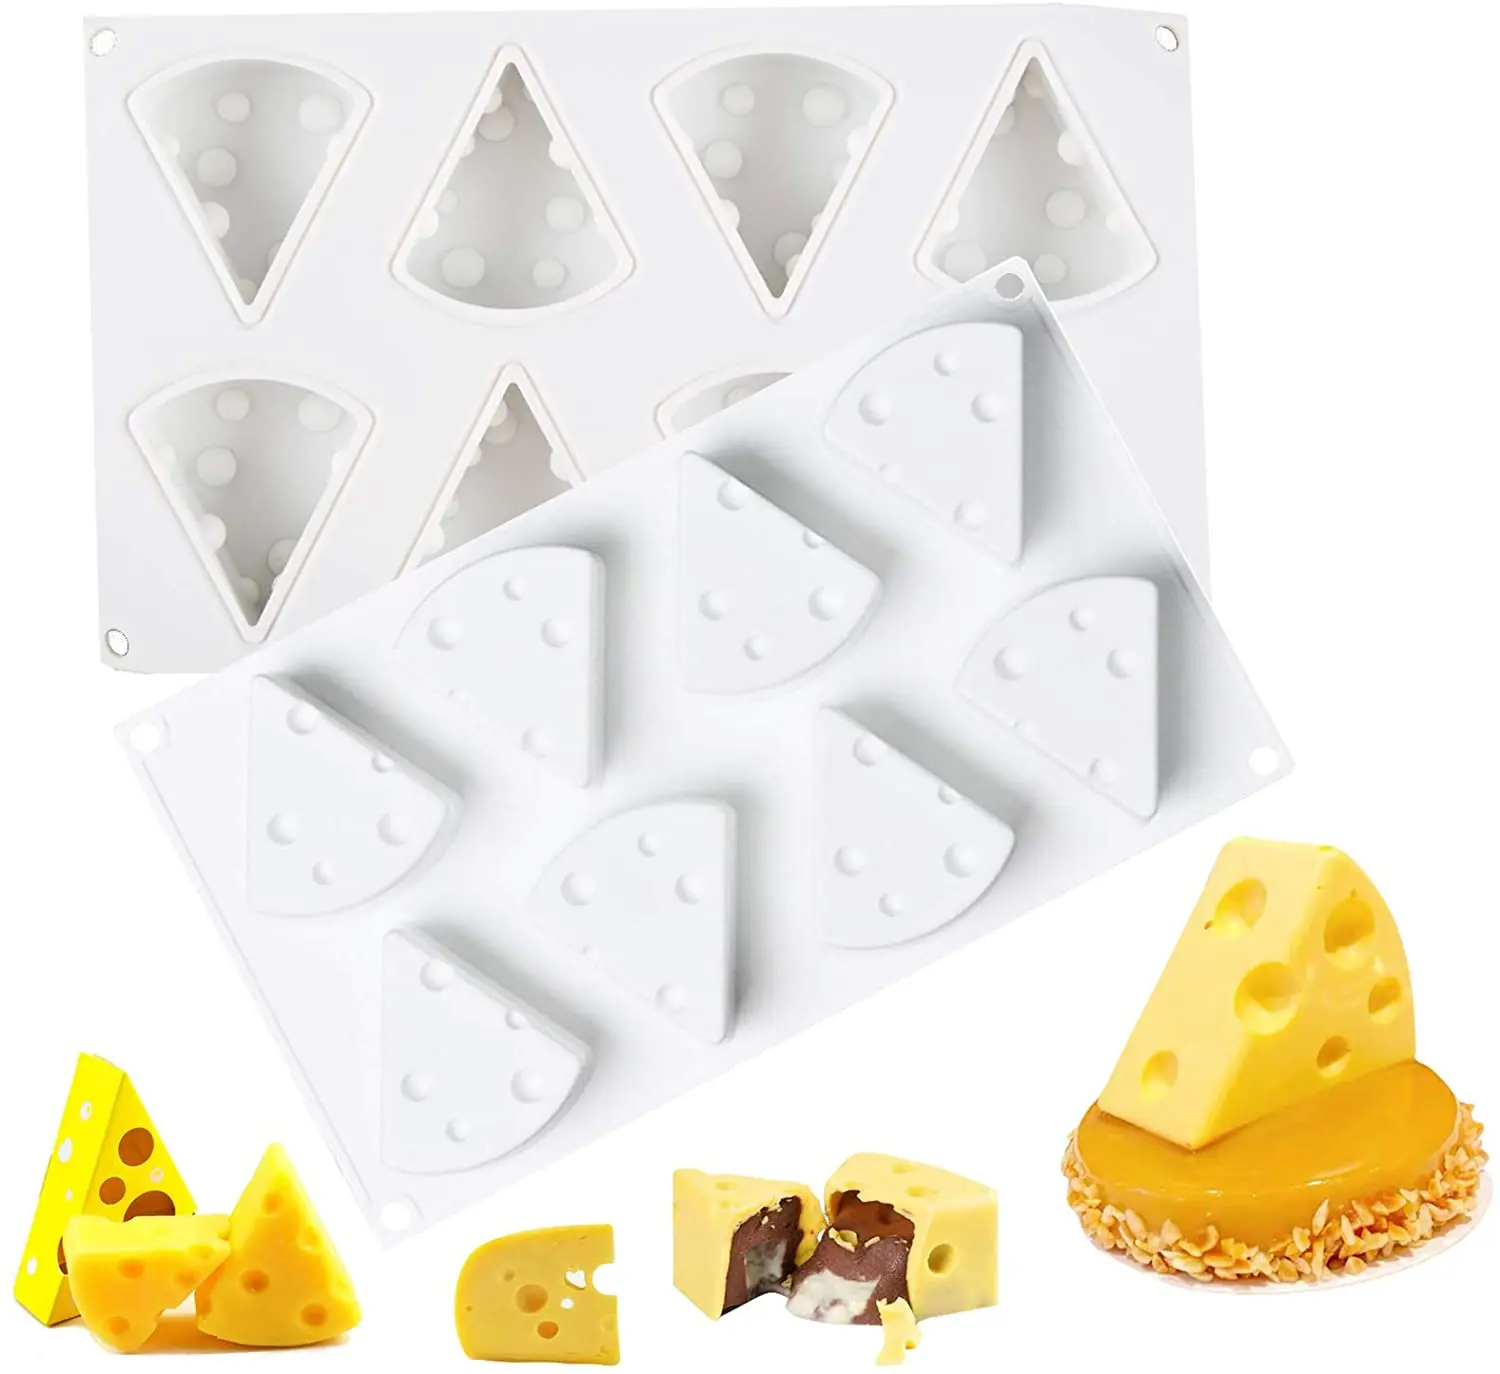 

Silicone Mousse Cake Molds 3D Bakeware DIY Mould, 8 Holes Large Cheeses Chocolate Fondant Pastry Baking Decorating Tools